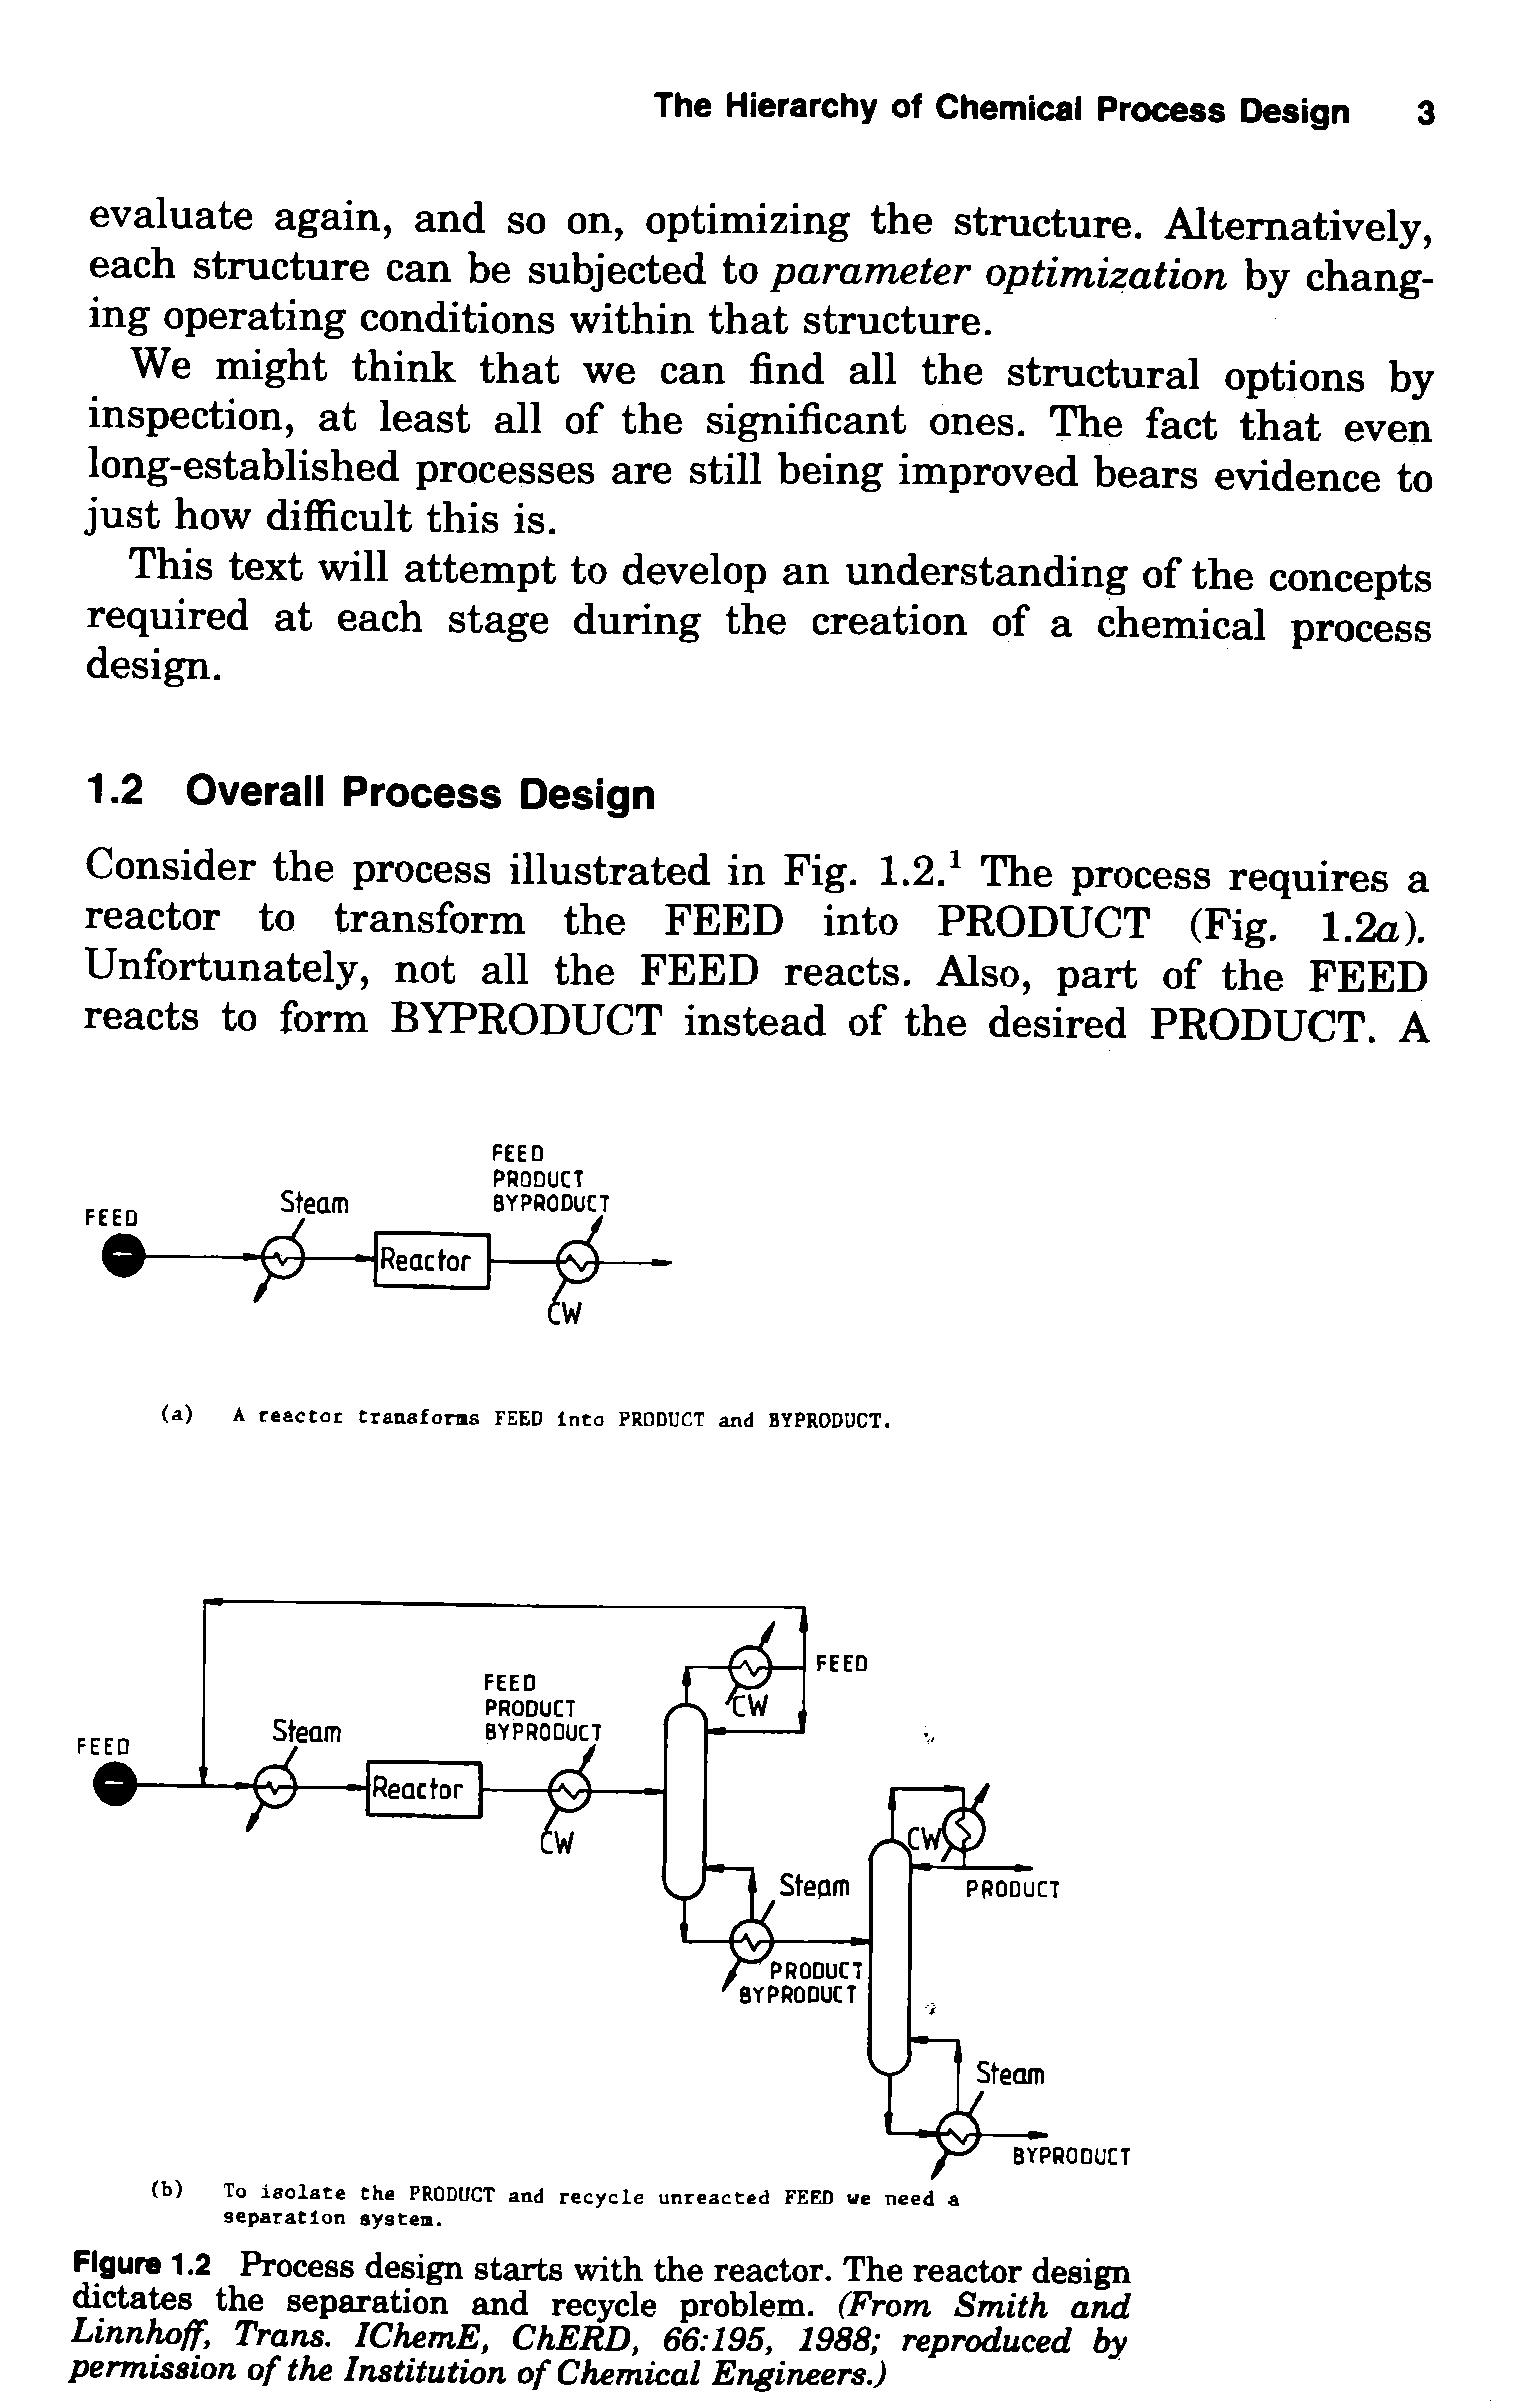 Figure 1.2 Process design starts with the reactor. The reactor design dictates the separation and recycle problem. (From Smith and Linnhoff, Trans. IChemE, ChERD, 66 195, 1988 reproduced by permission of the Institution of Chemical Engineers.)...